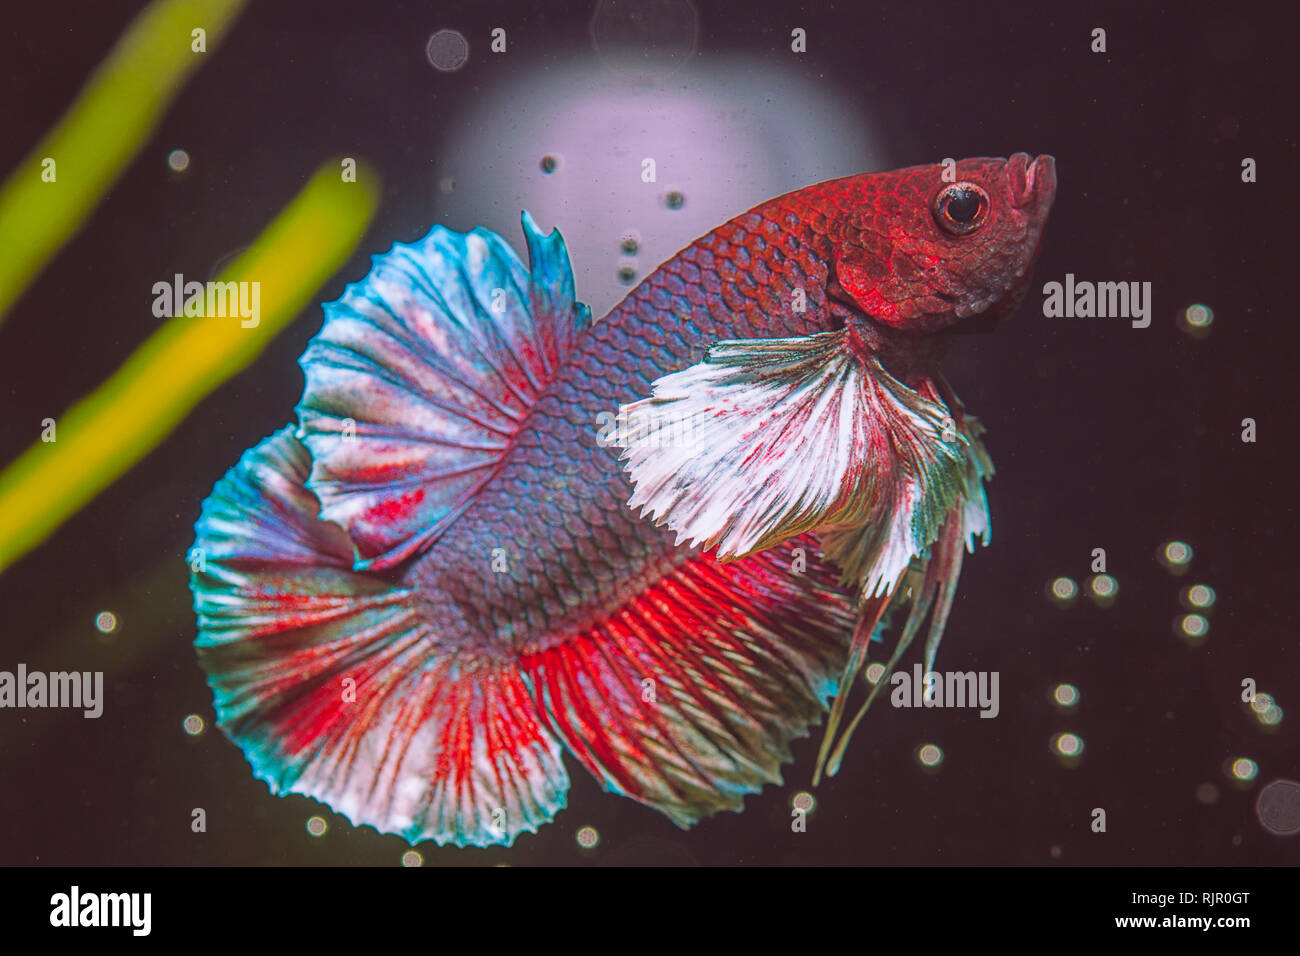 Close-up and details of a Dumbo Ear Betta Fish Stock Photo